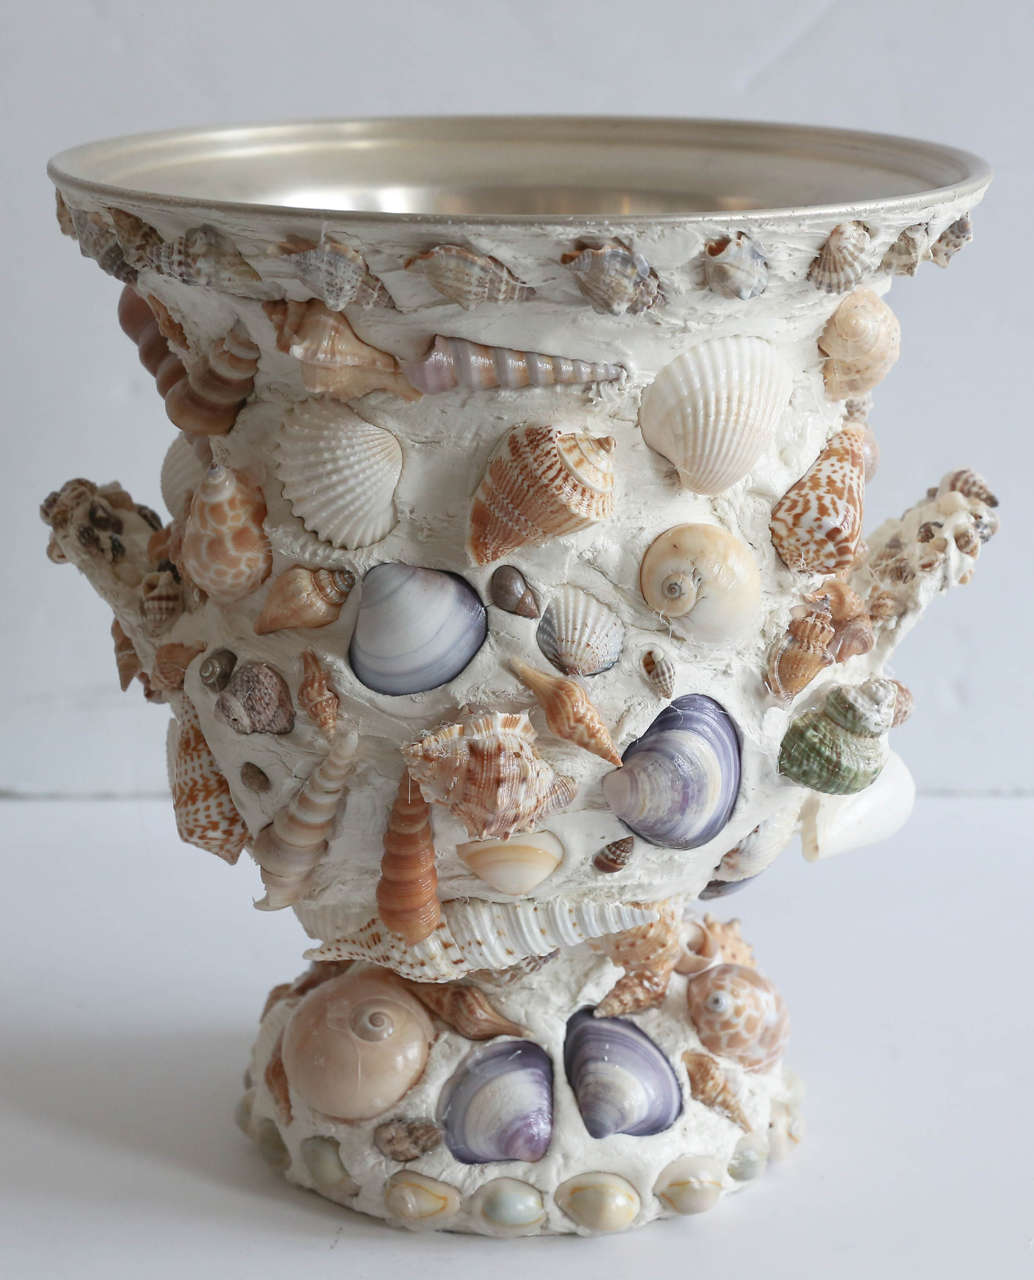 Vintage silver plate urn covered in shells.